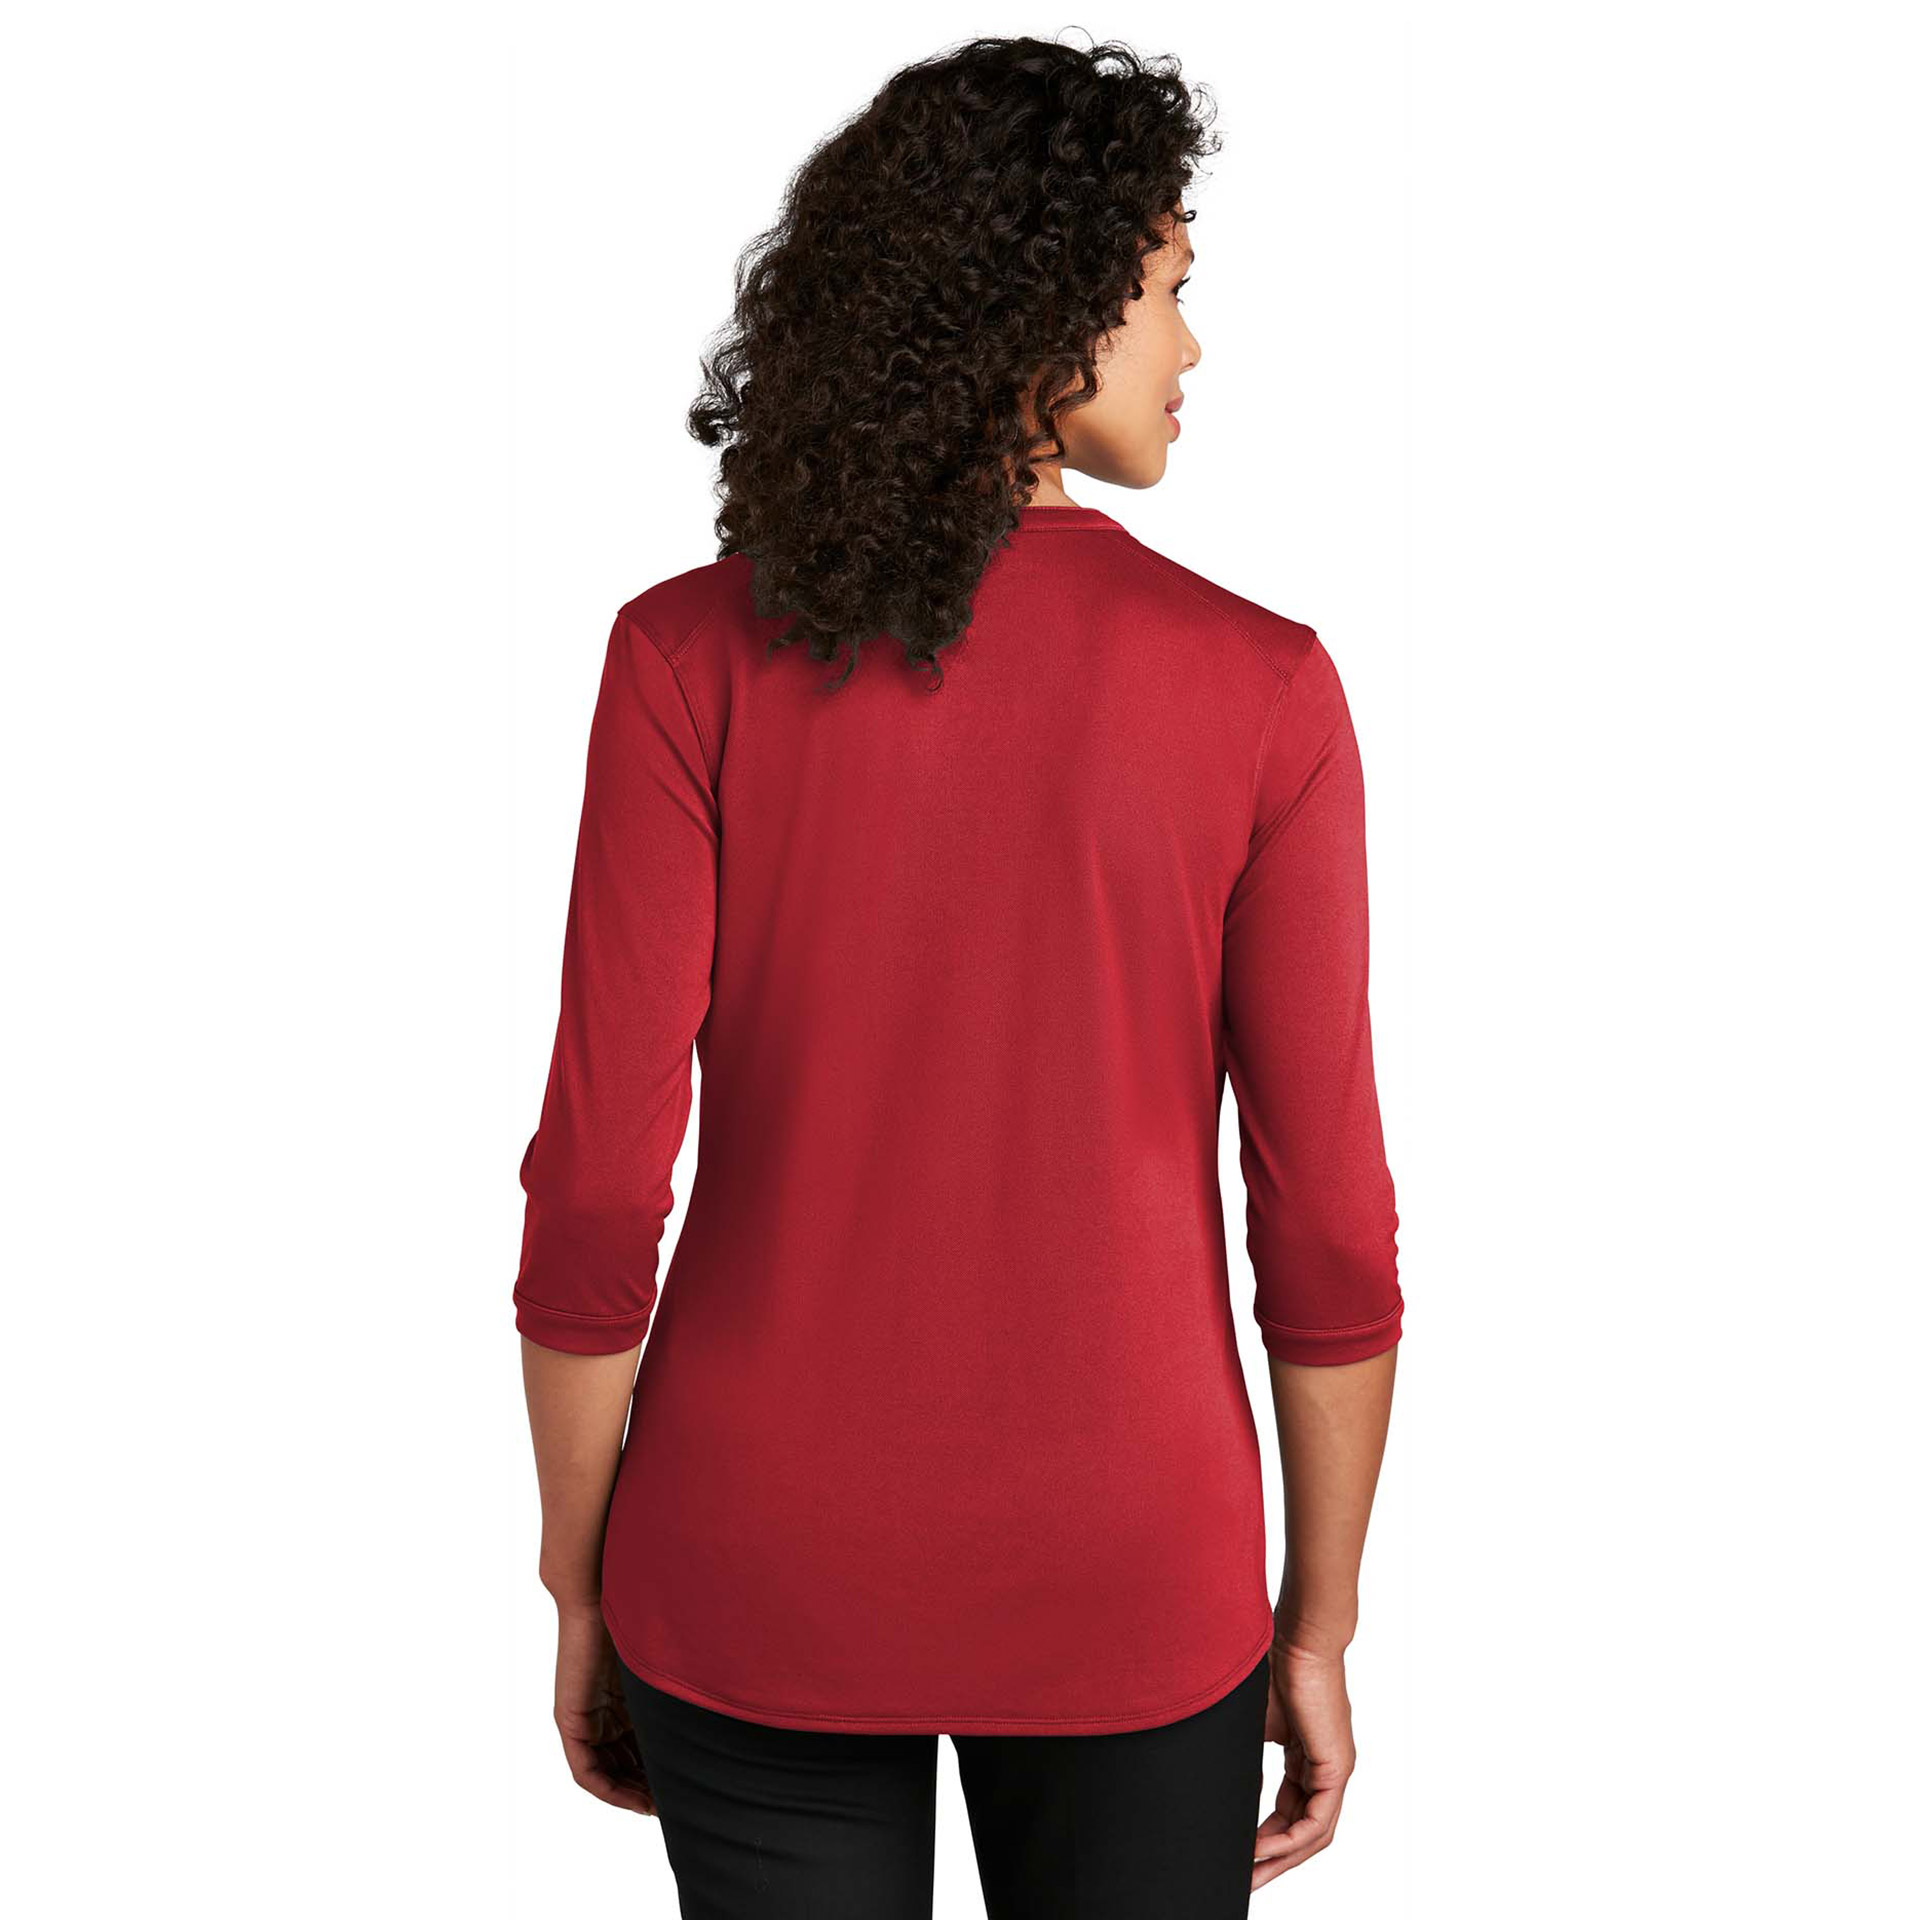 Port Authority LK750 Ladies UV Choice Pique Henley - Rich Red | Full Source